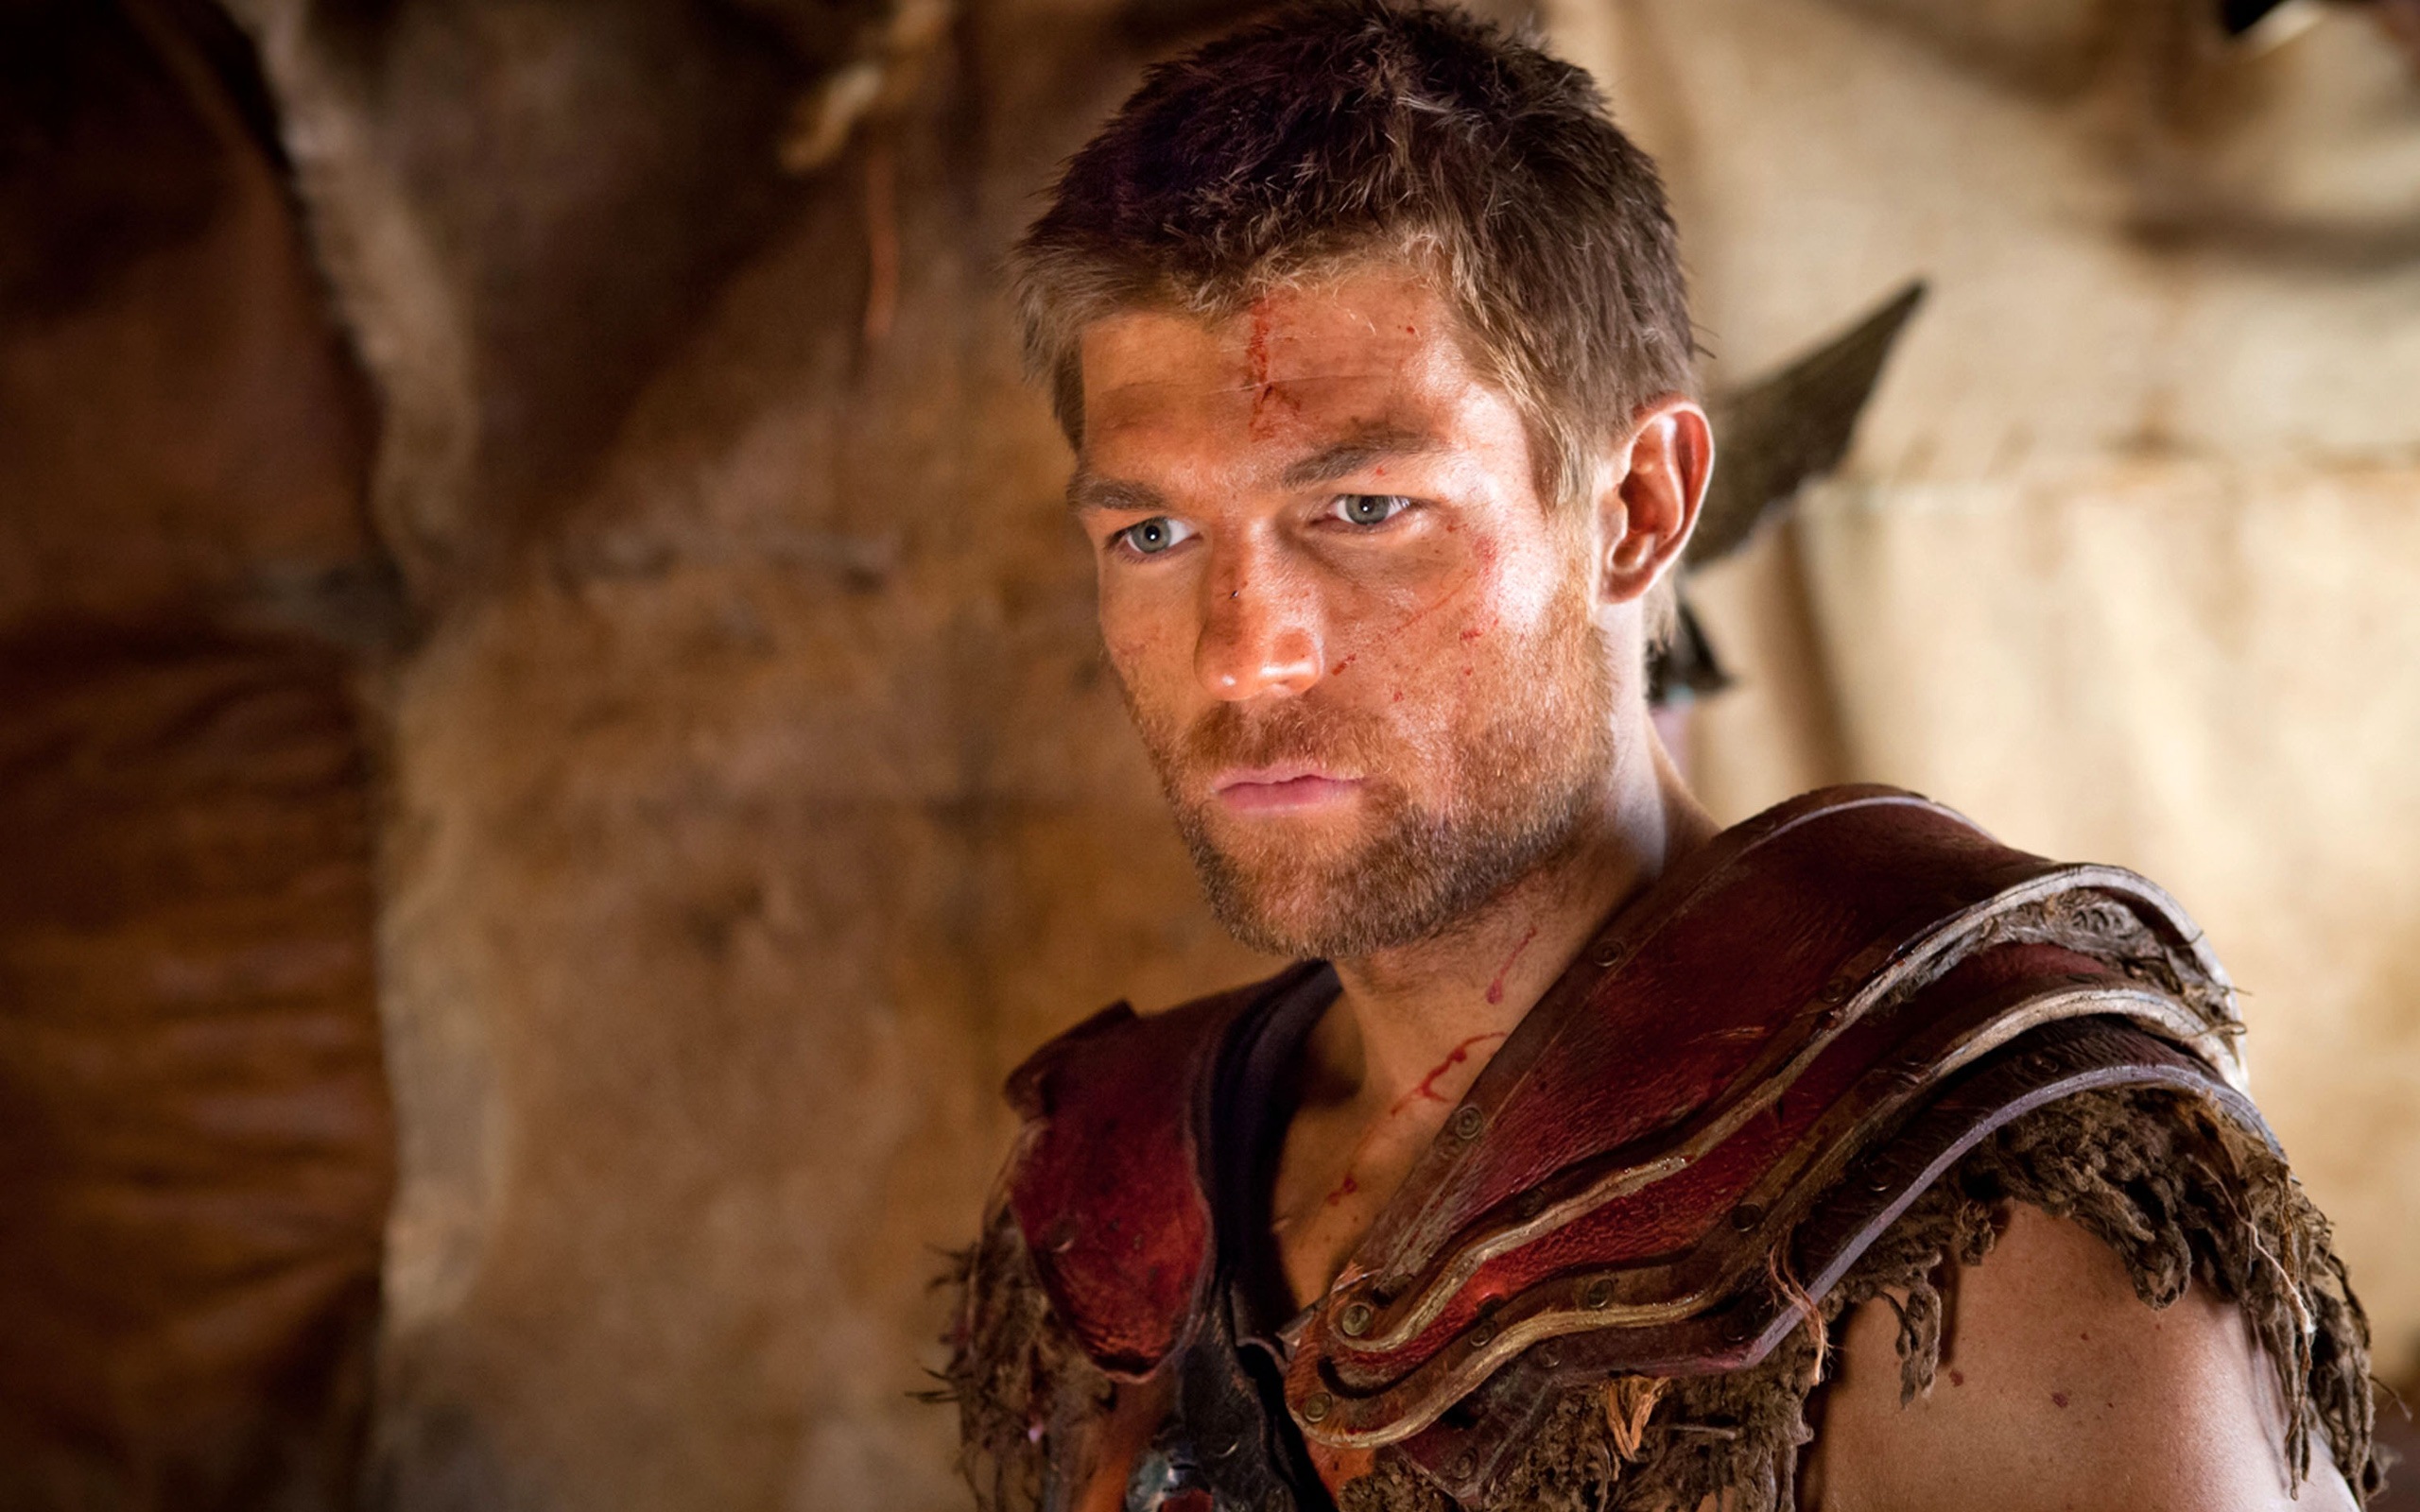 Spartacus: War of the Damned HD Wallpaper #10 - 2560x1600